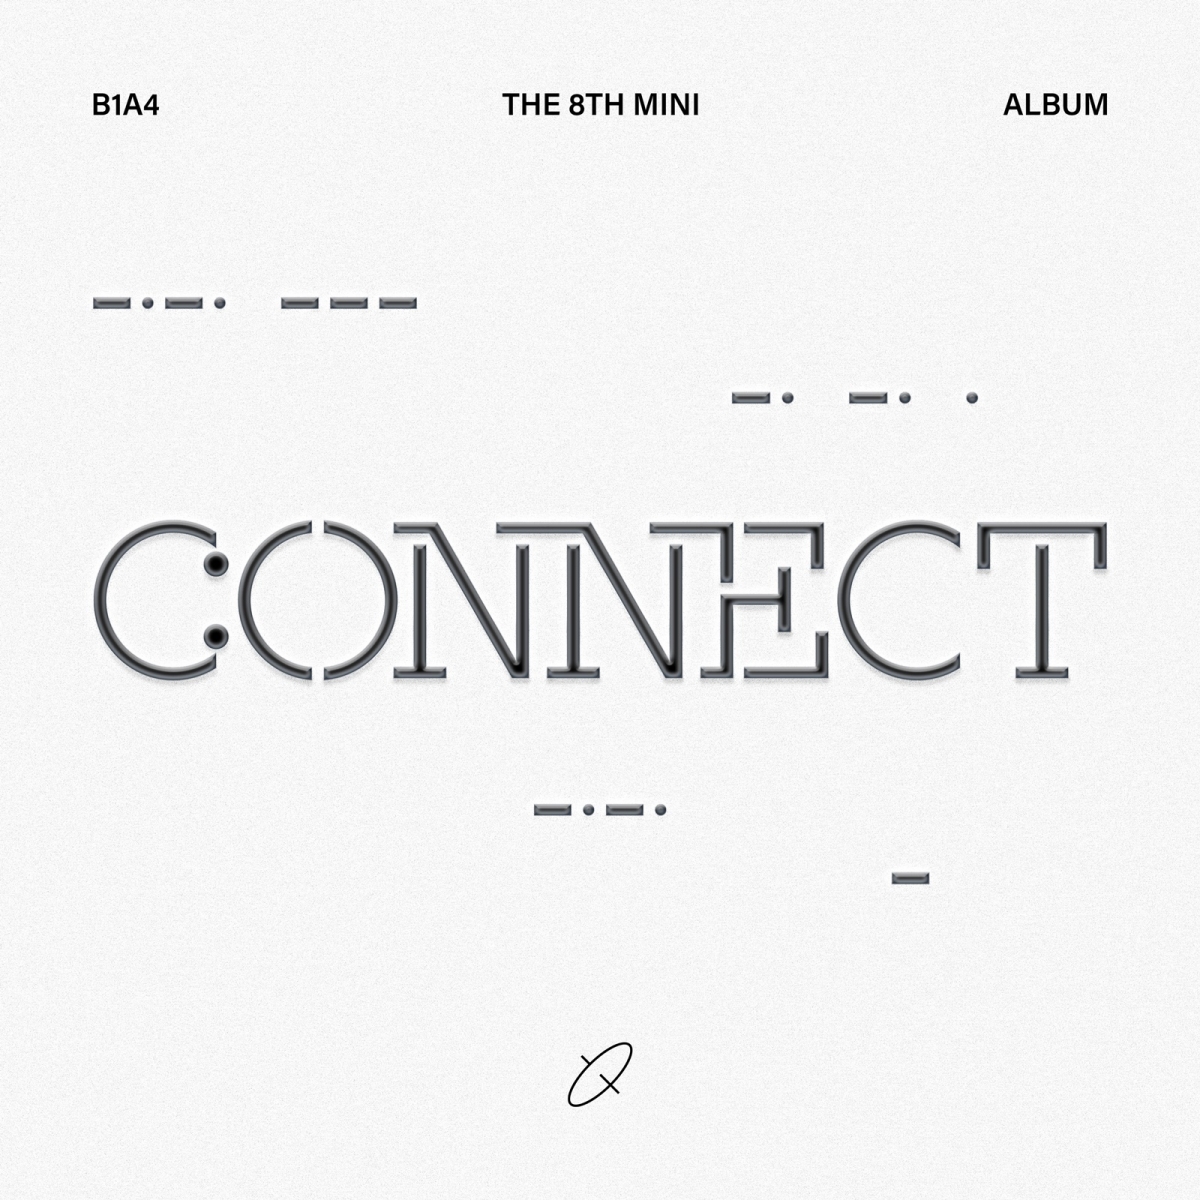 B1A4 releases new album today (8th)... Return after 2 years and 2 months